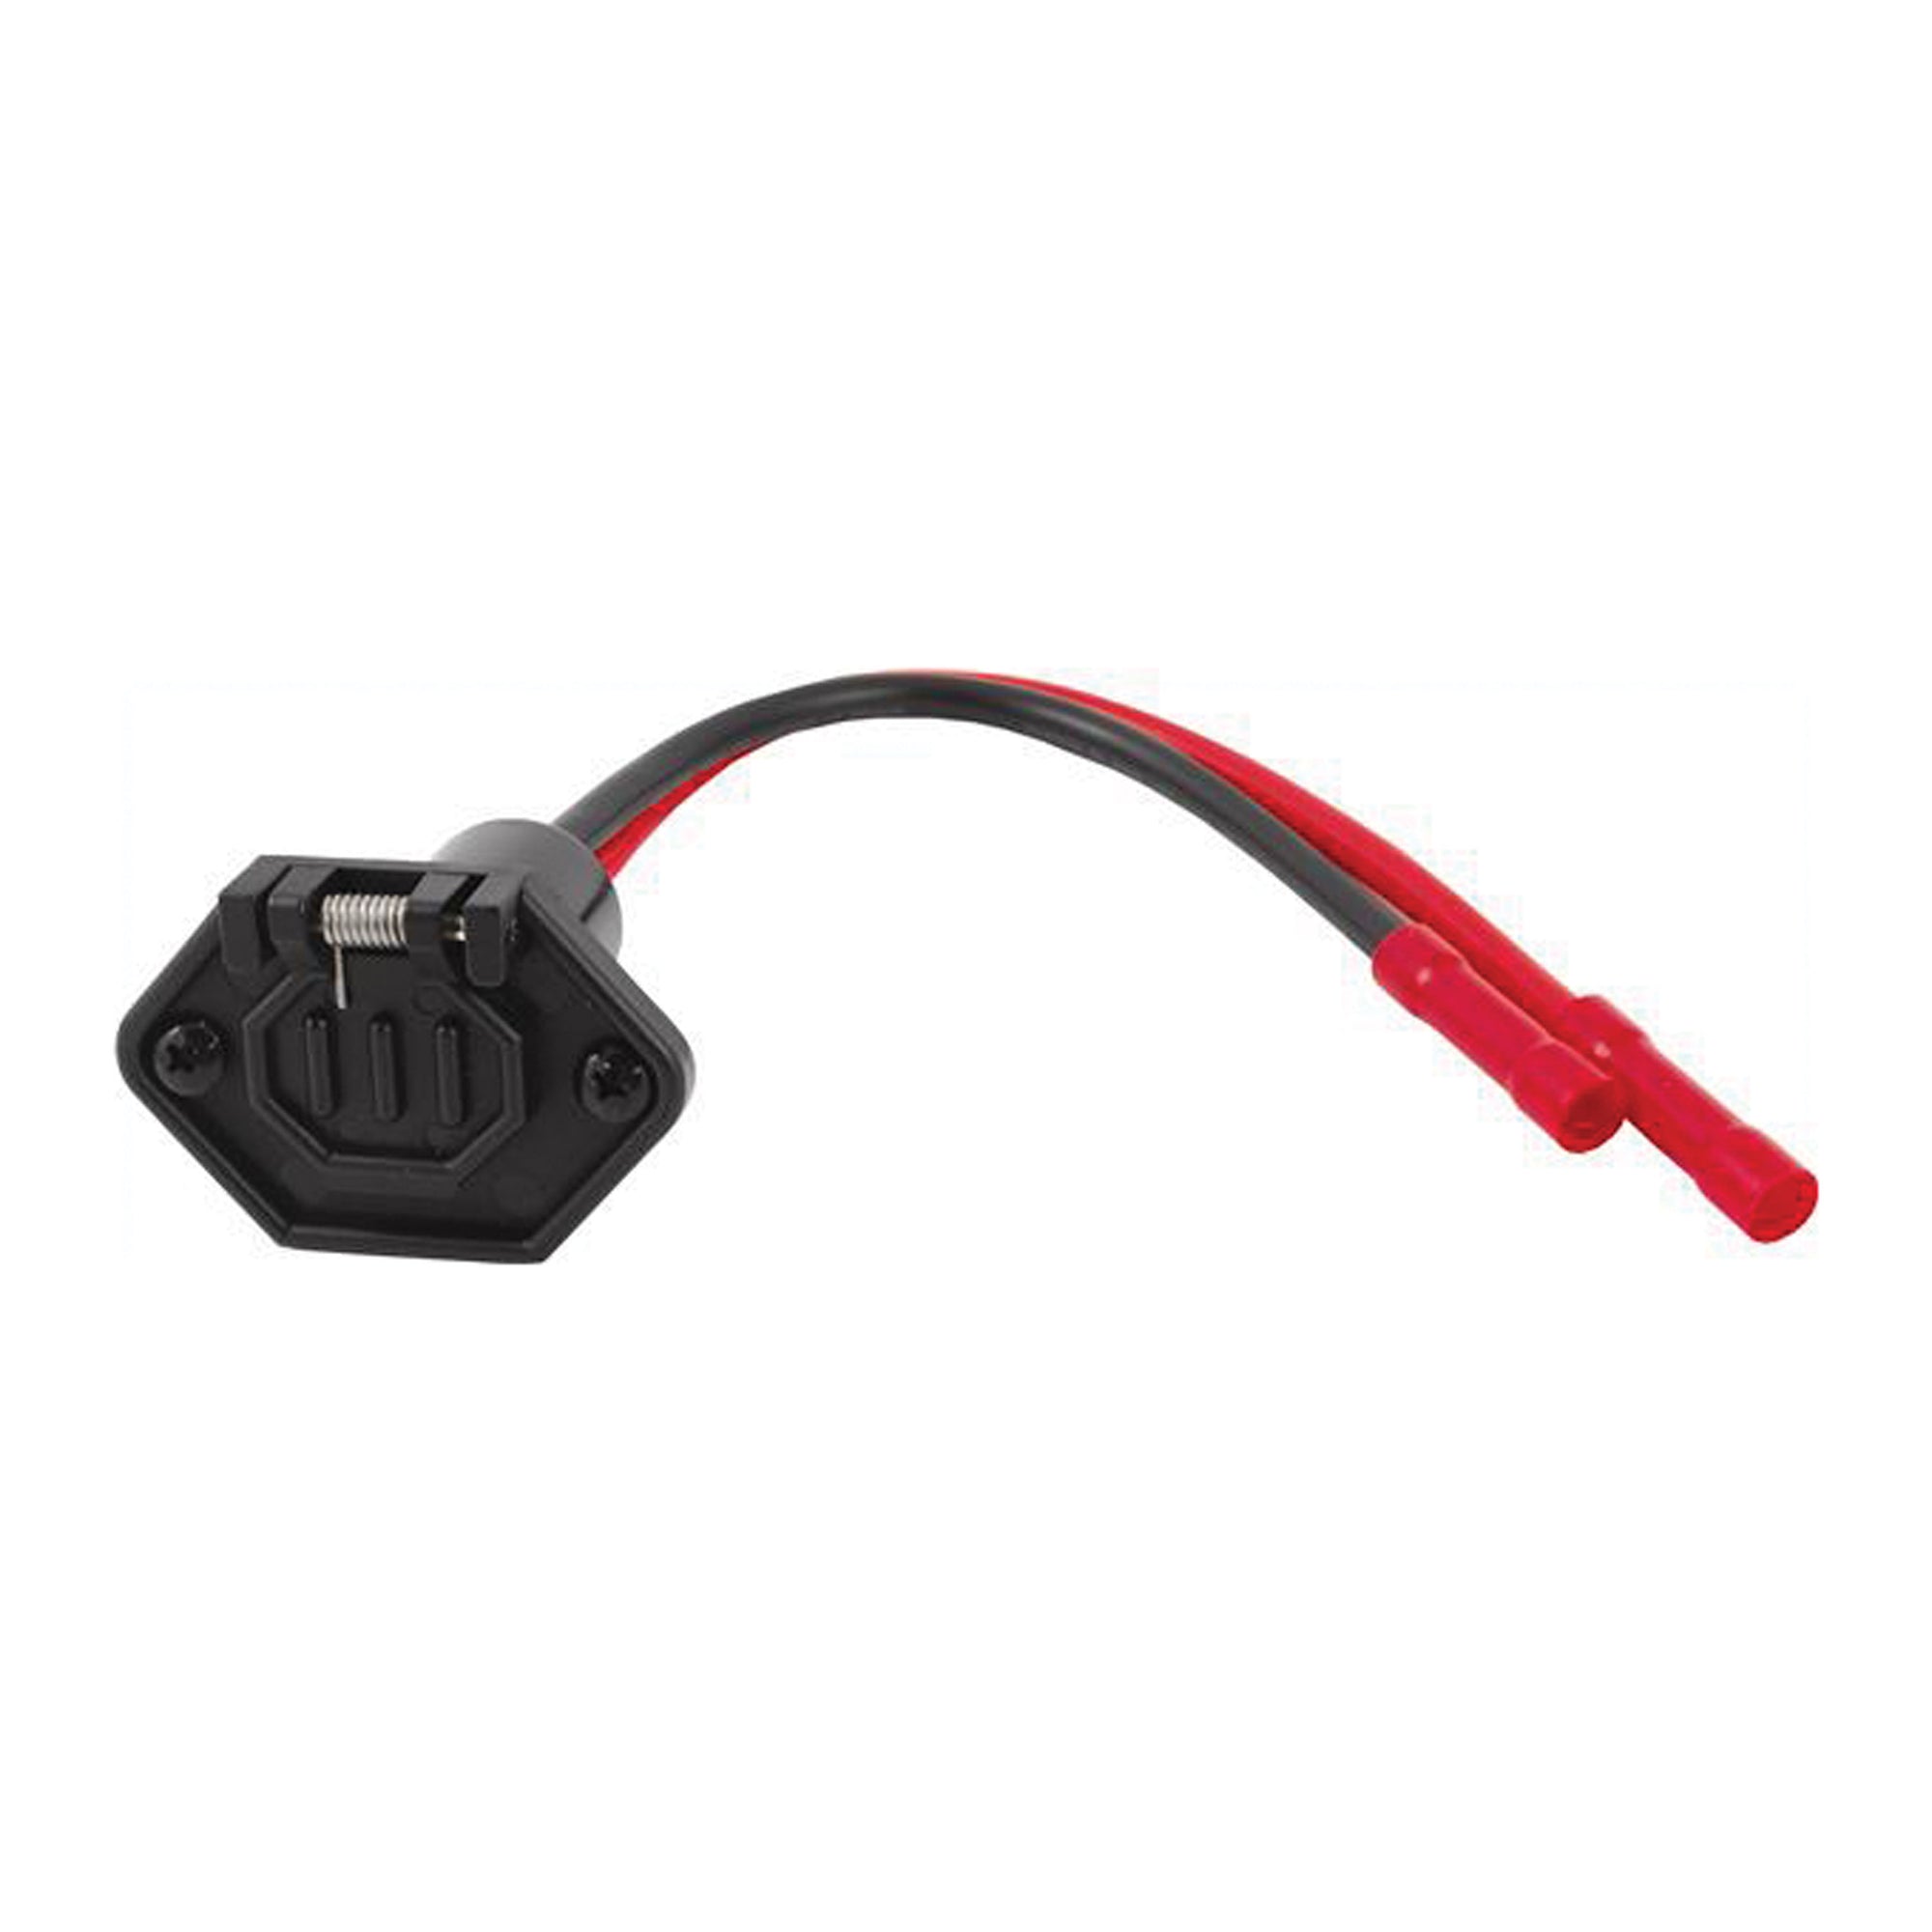 Attwood 14366-6 Heavy-Duty 12V Trolling Motor Connector Receptacle - 2-Wire, 8 AWG, Female